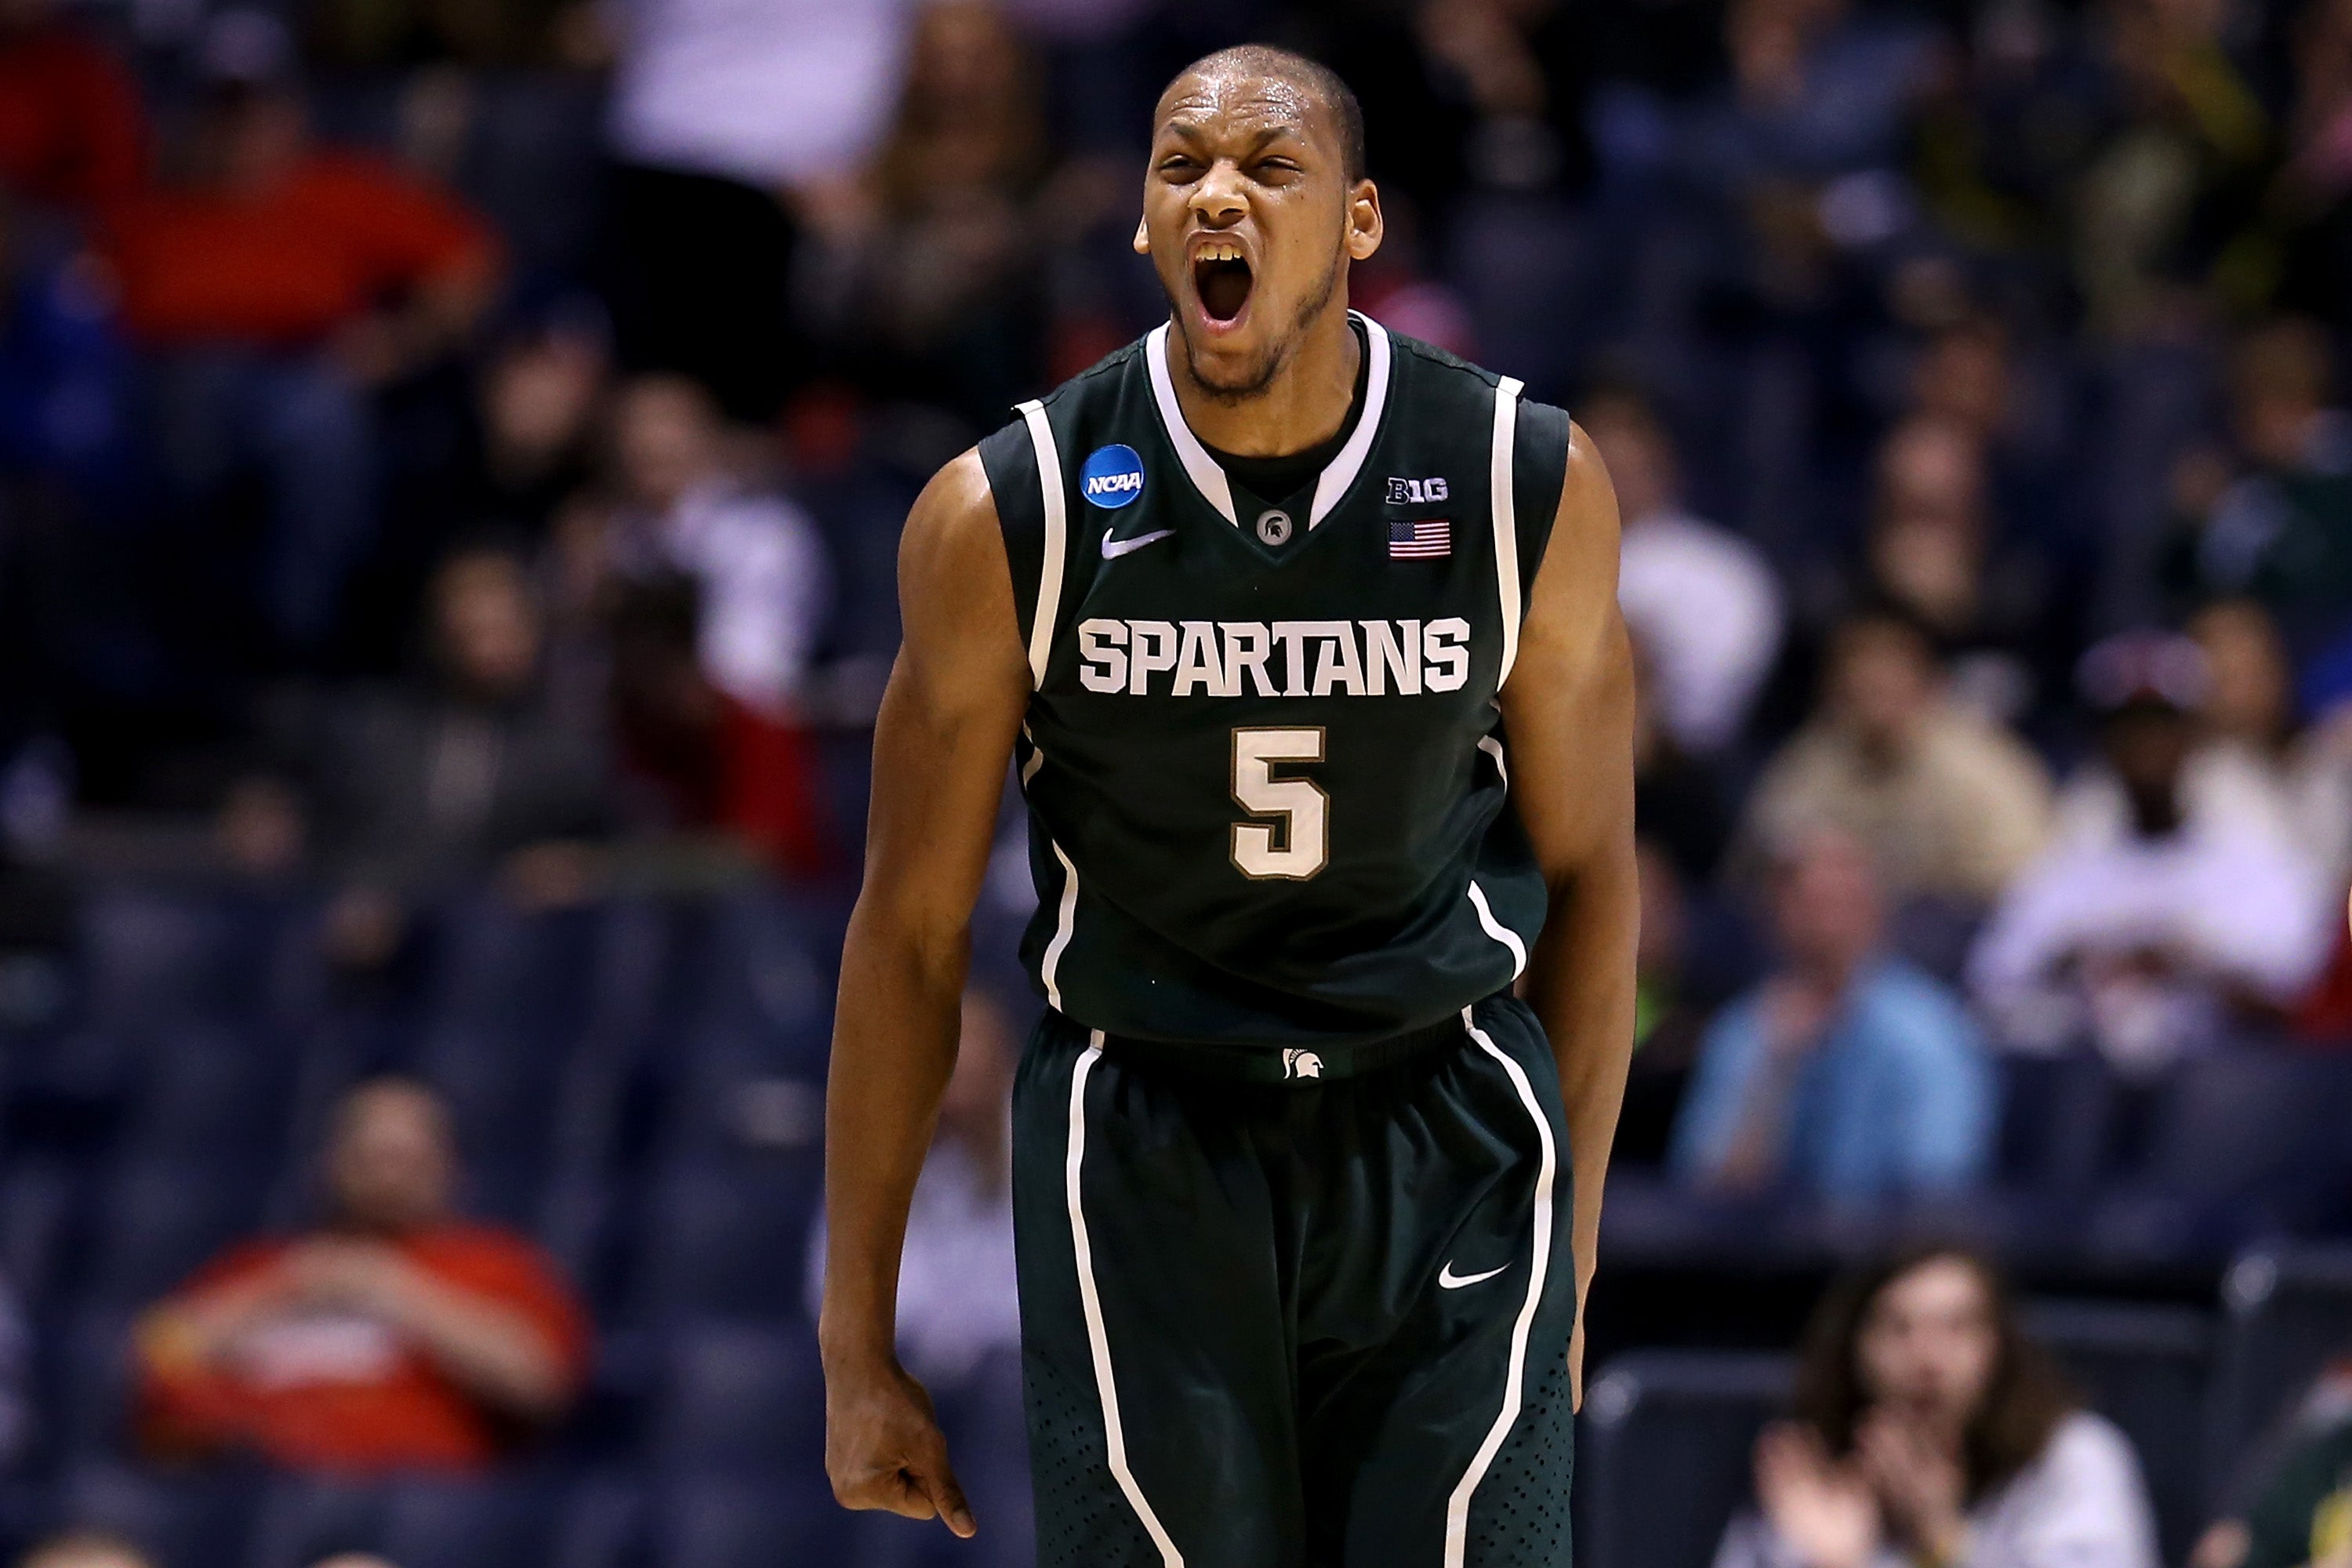 Adreian Payne #5 of the Michigan State Spartans reacts after he made a shot in the first half against the Duke Blue Devils during the Midwest Region Semifinal round of the 2013 NCAA Men's Basketball Tournament